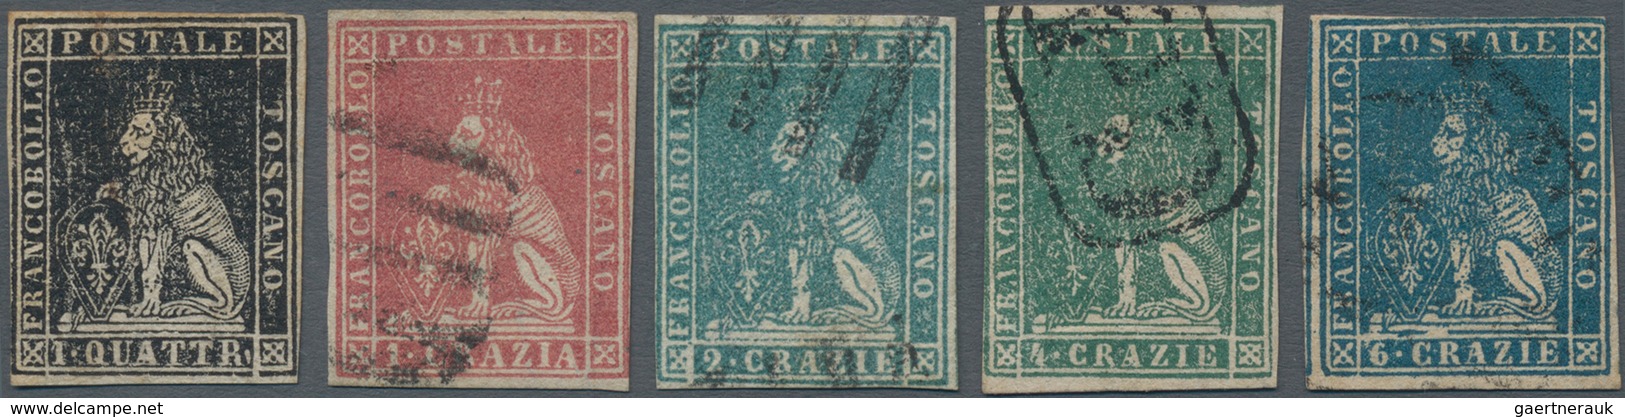 Italien - Altitalienische Staaten: Toscana: 1857, Five Stamps Set 1 Q. Black To 6 Cr. Blue, A Fresh - Tuscany